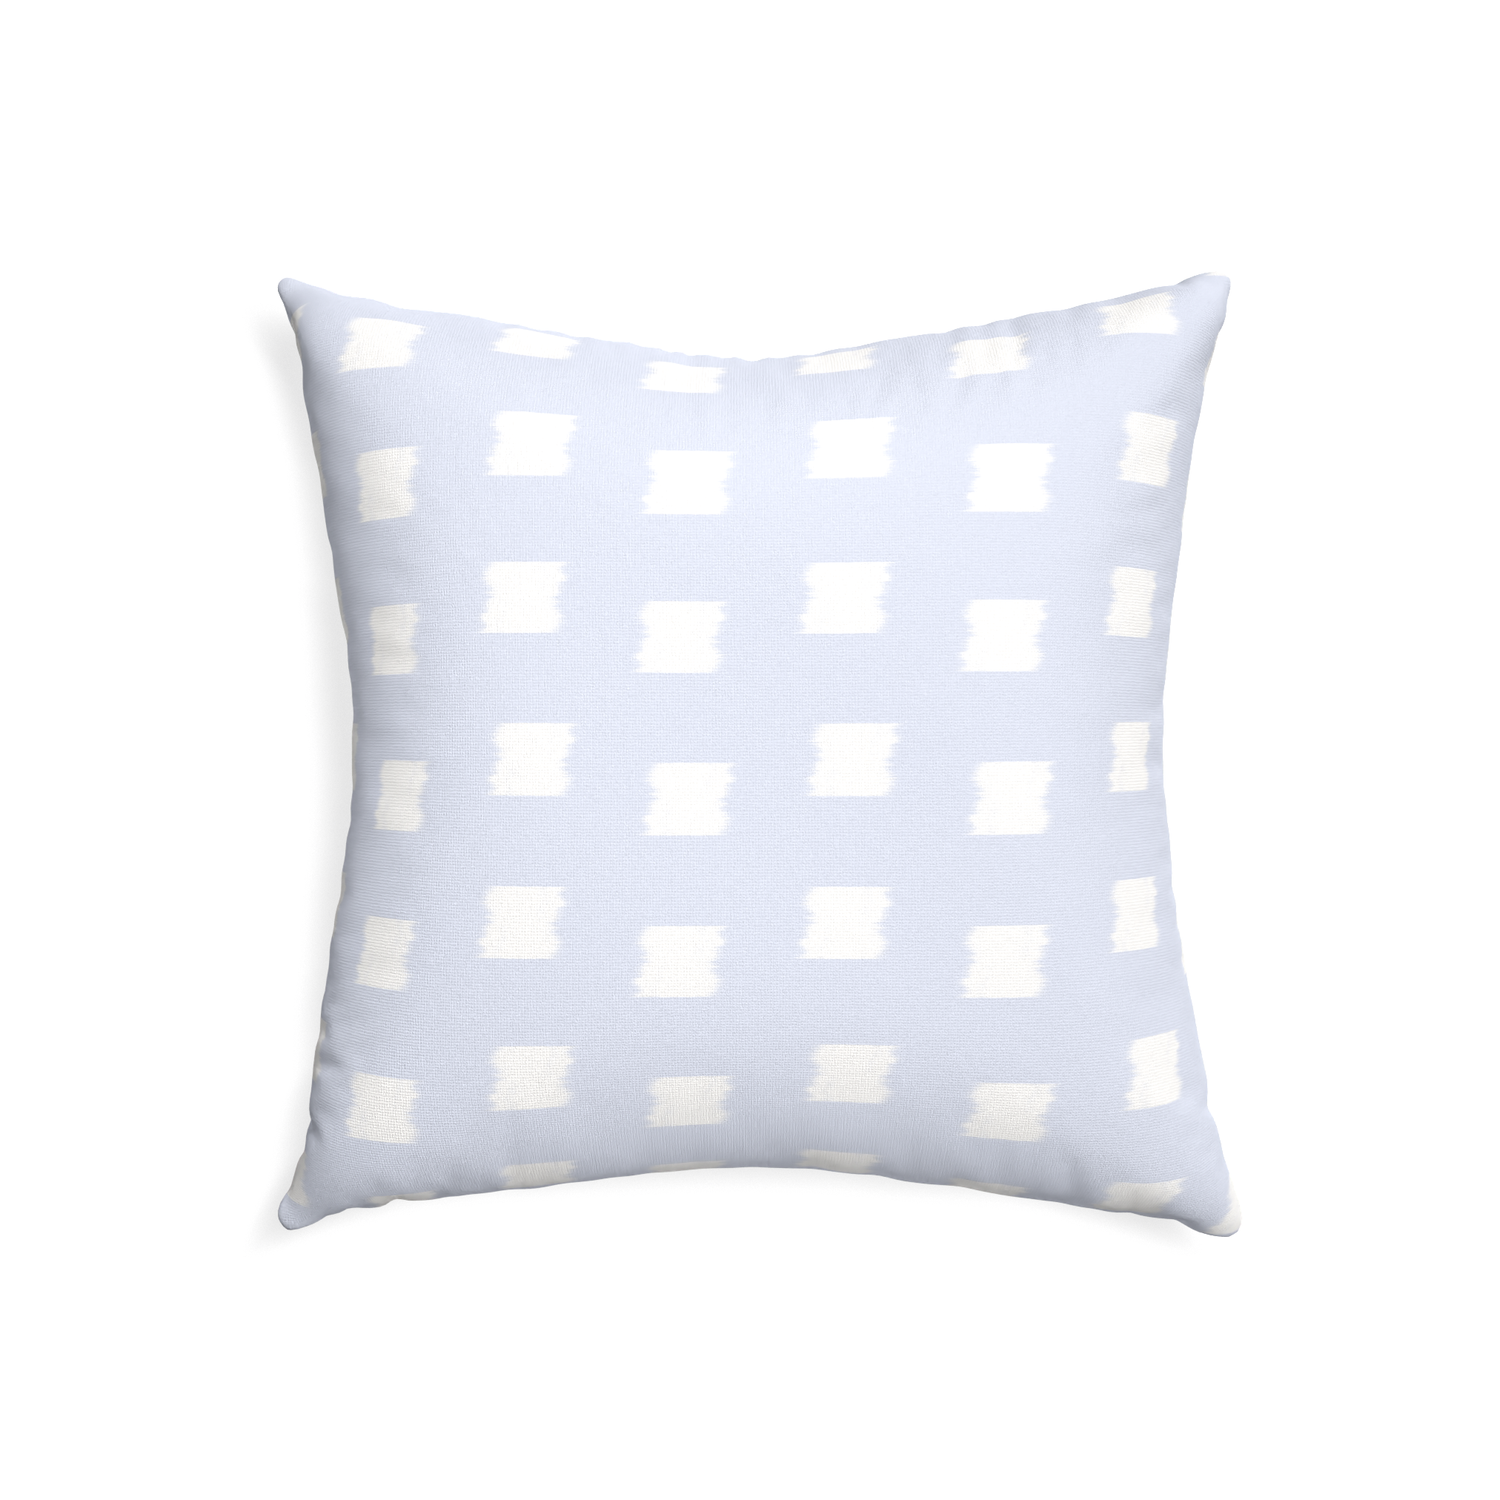 22-square denton custom sky blue patternpillow with none on white background